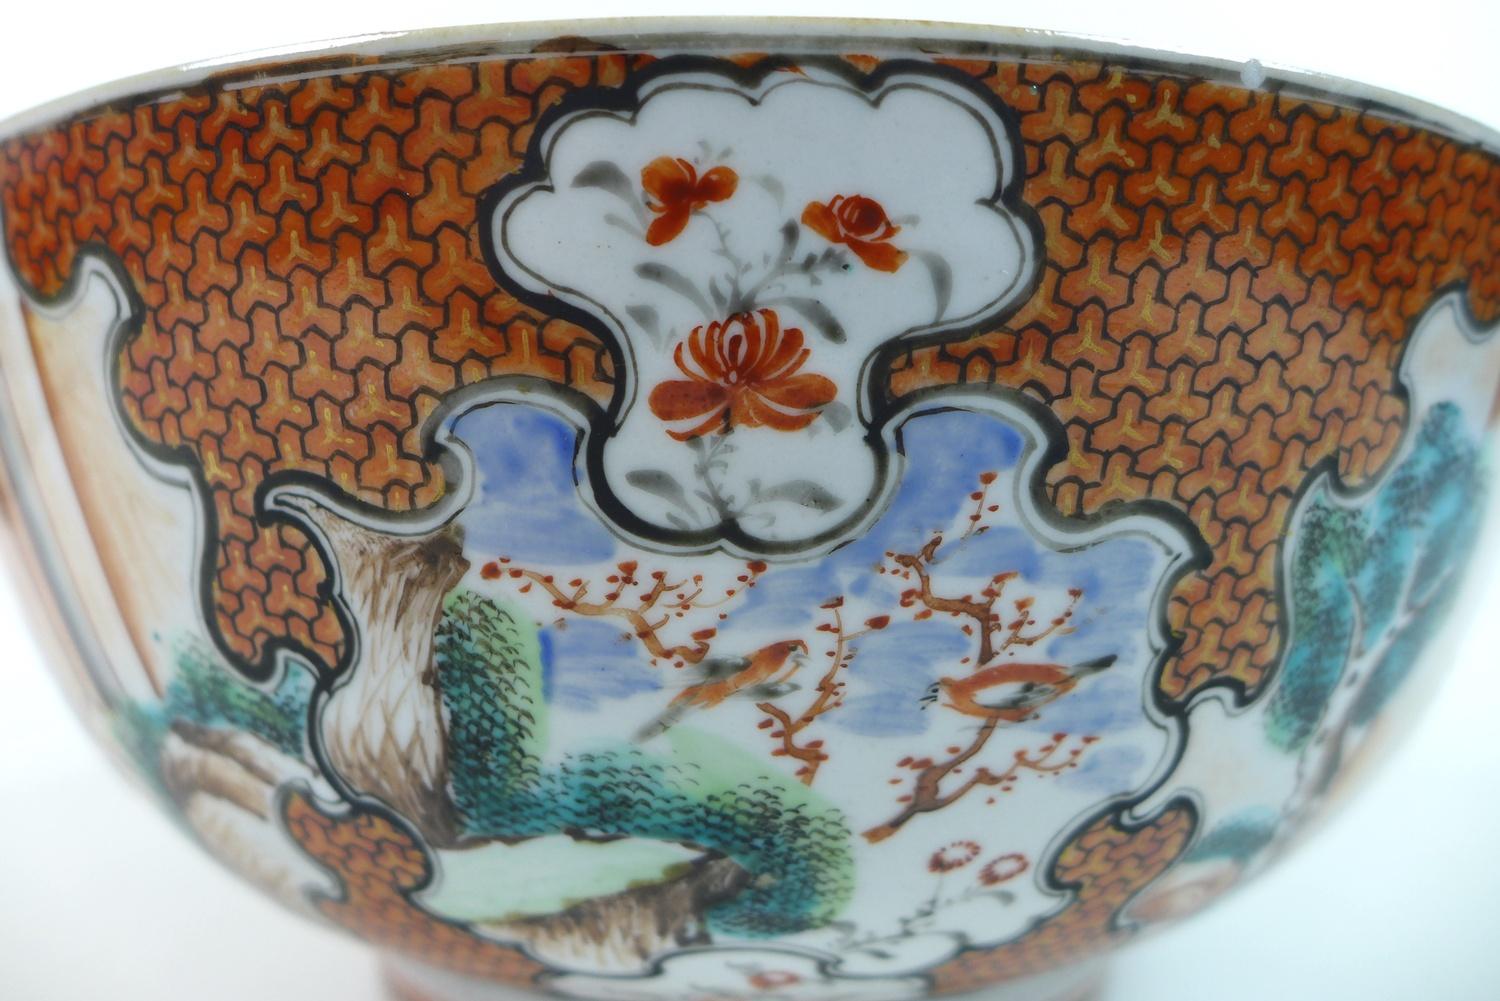 A Chinese Export porcelain famille rose punch bowl, Qing Dynasty, late 18th century, polychrome - Image 11 of 20